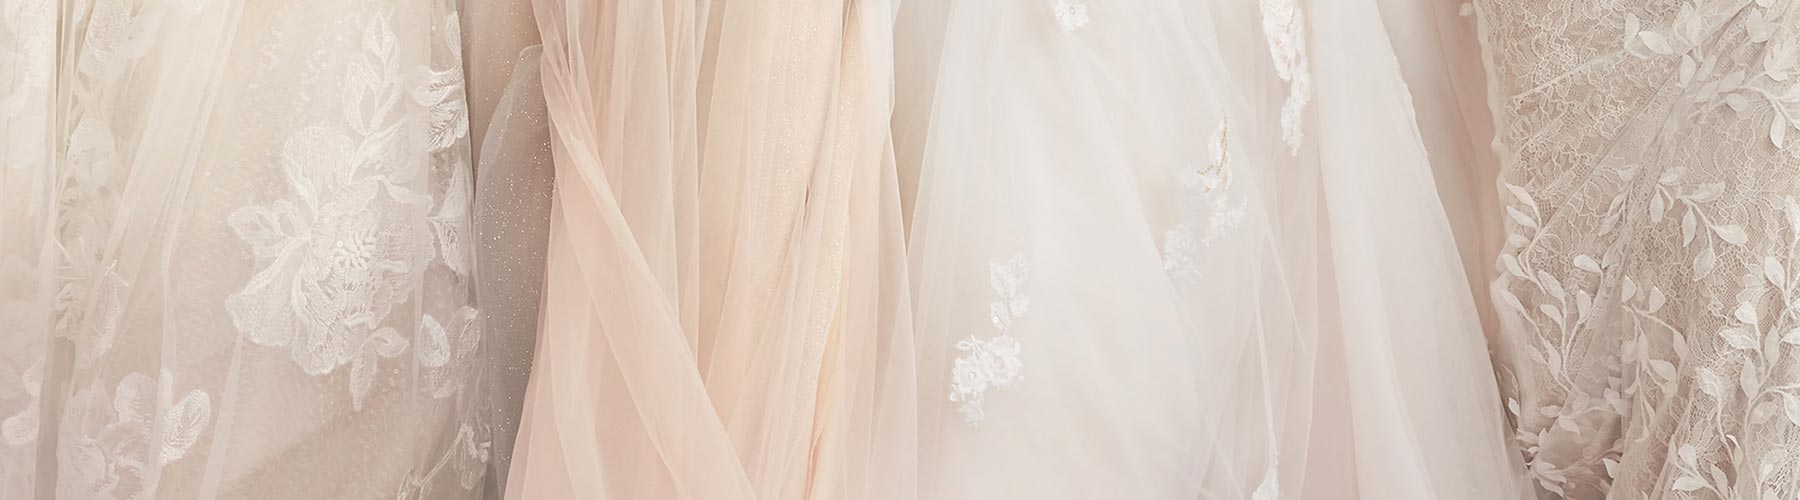 close up of textures on wedding dresses